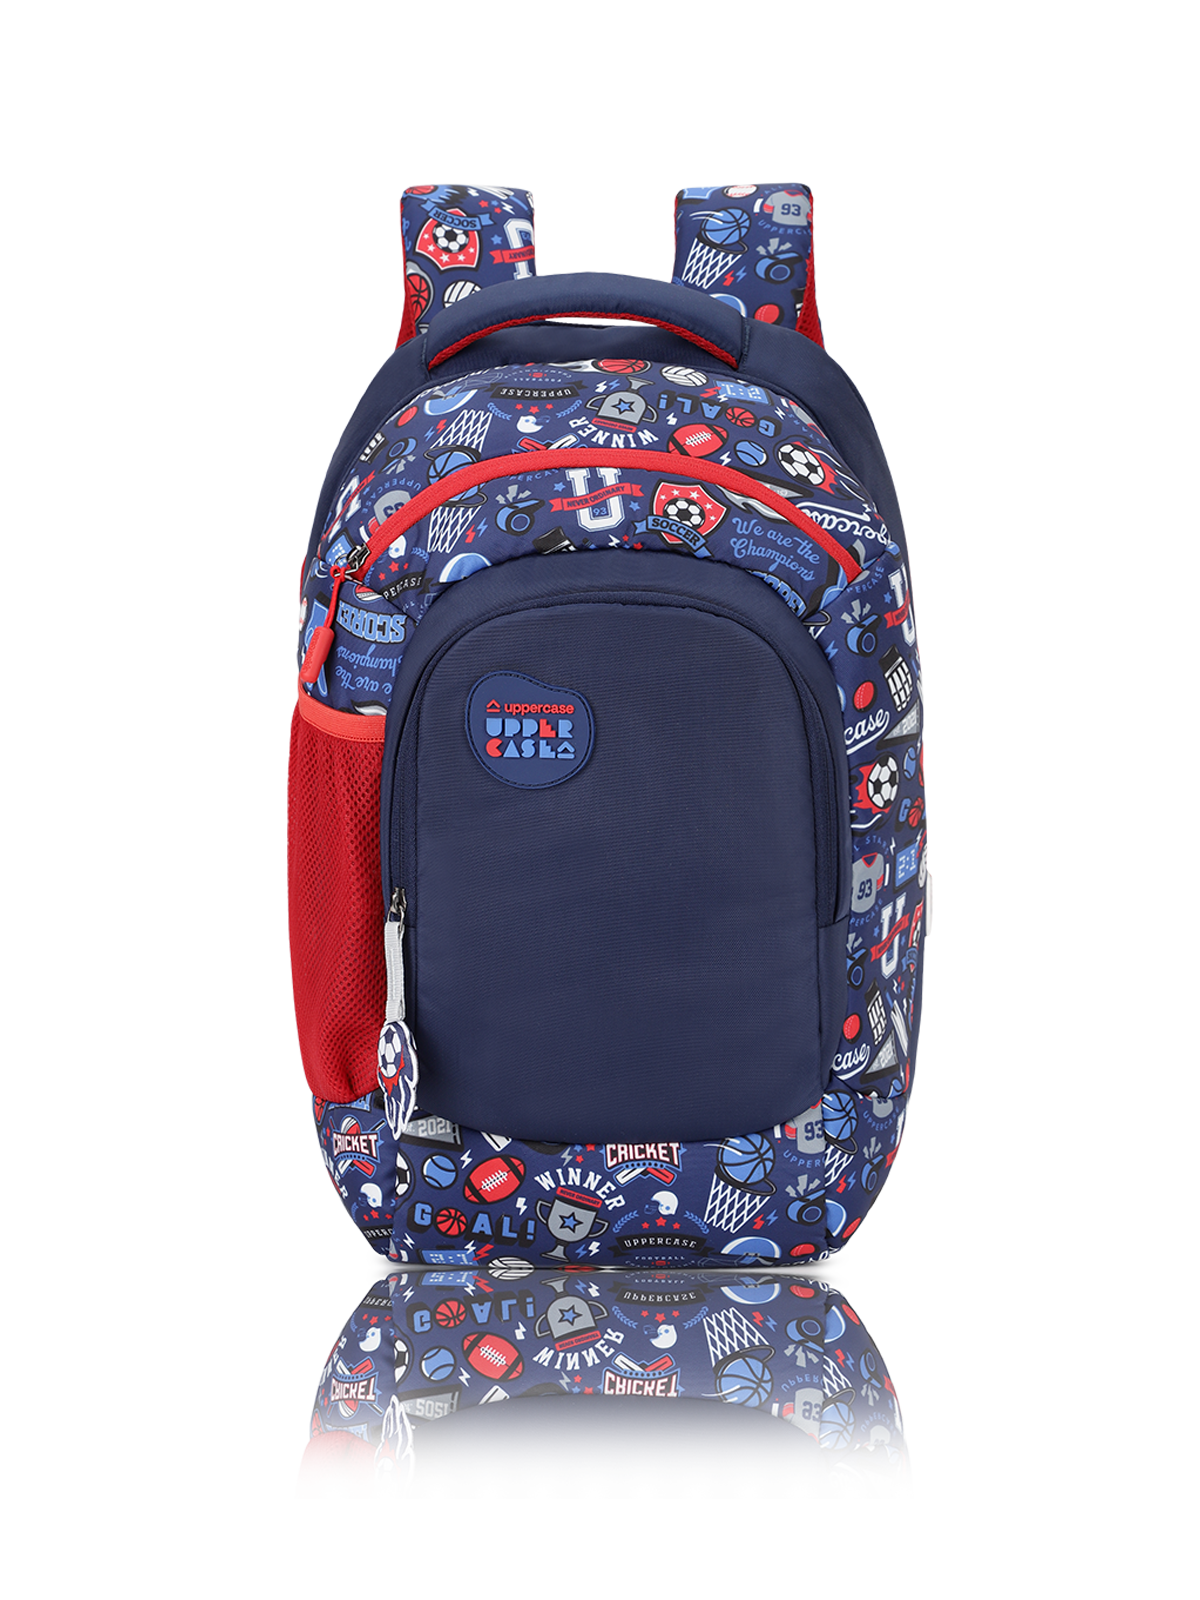 uppercase Sprout 01 School Backpack with Puffy Ears for Boys Girls 30L Navy Blue